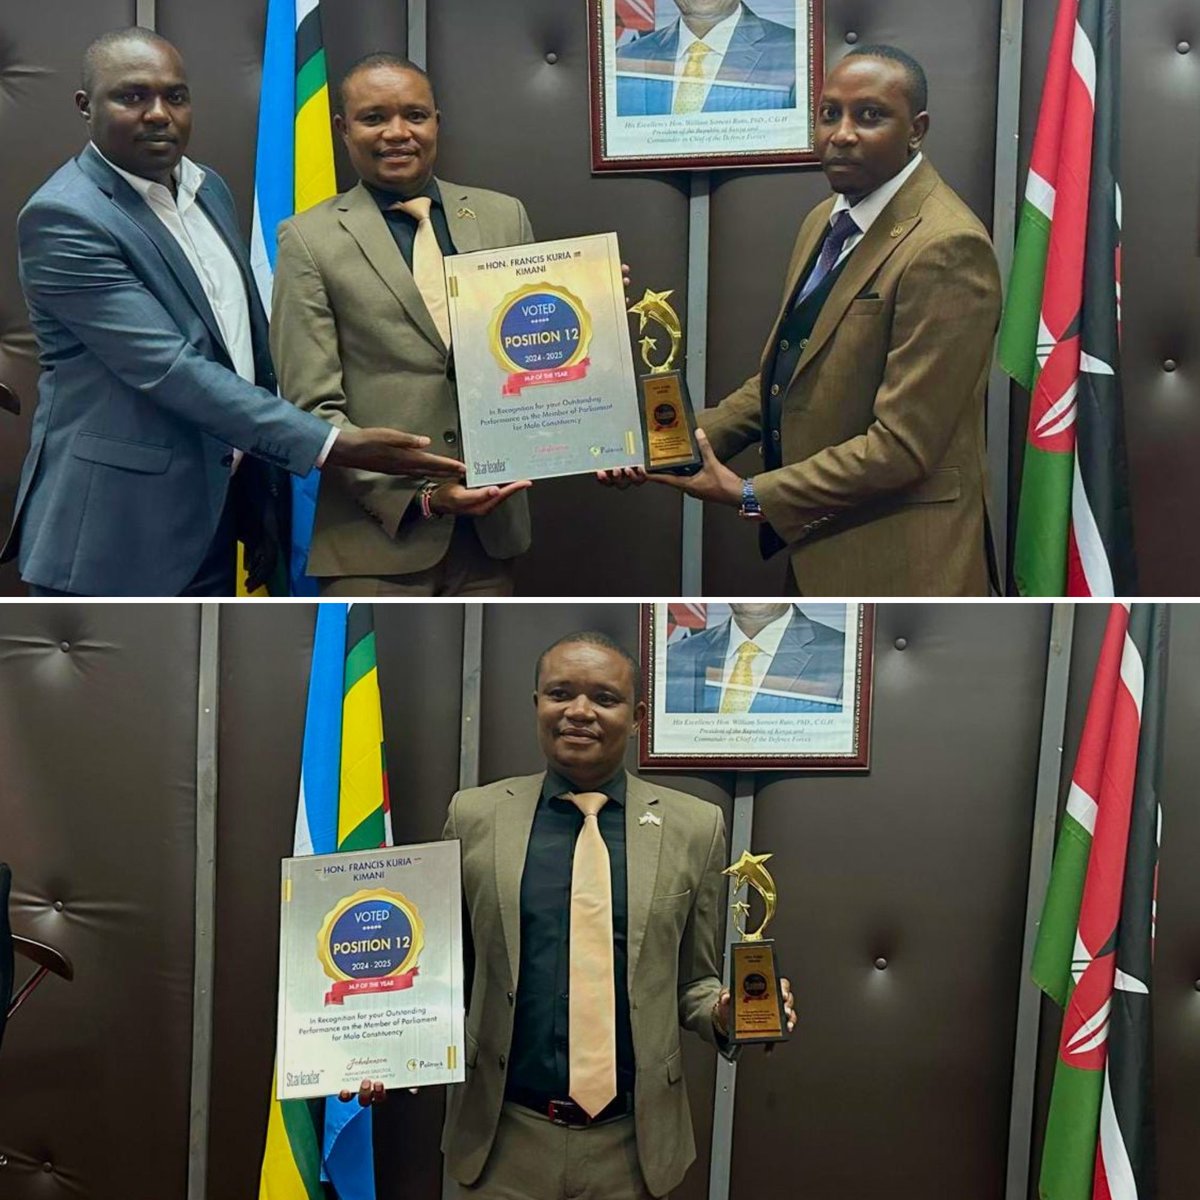 MP Kuria Kimani receives an award for his performance in leadership and development in the Pollster Ranking, 2024